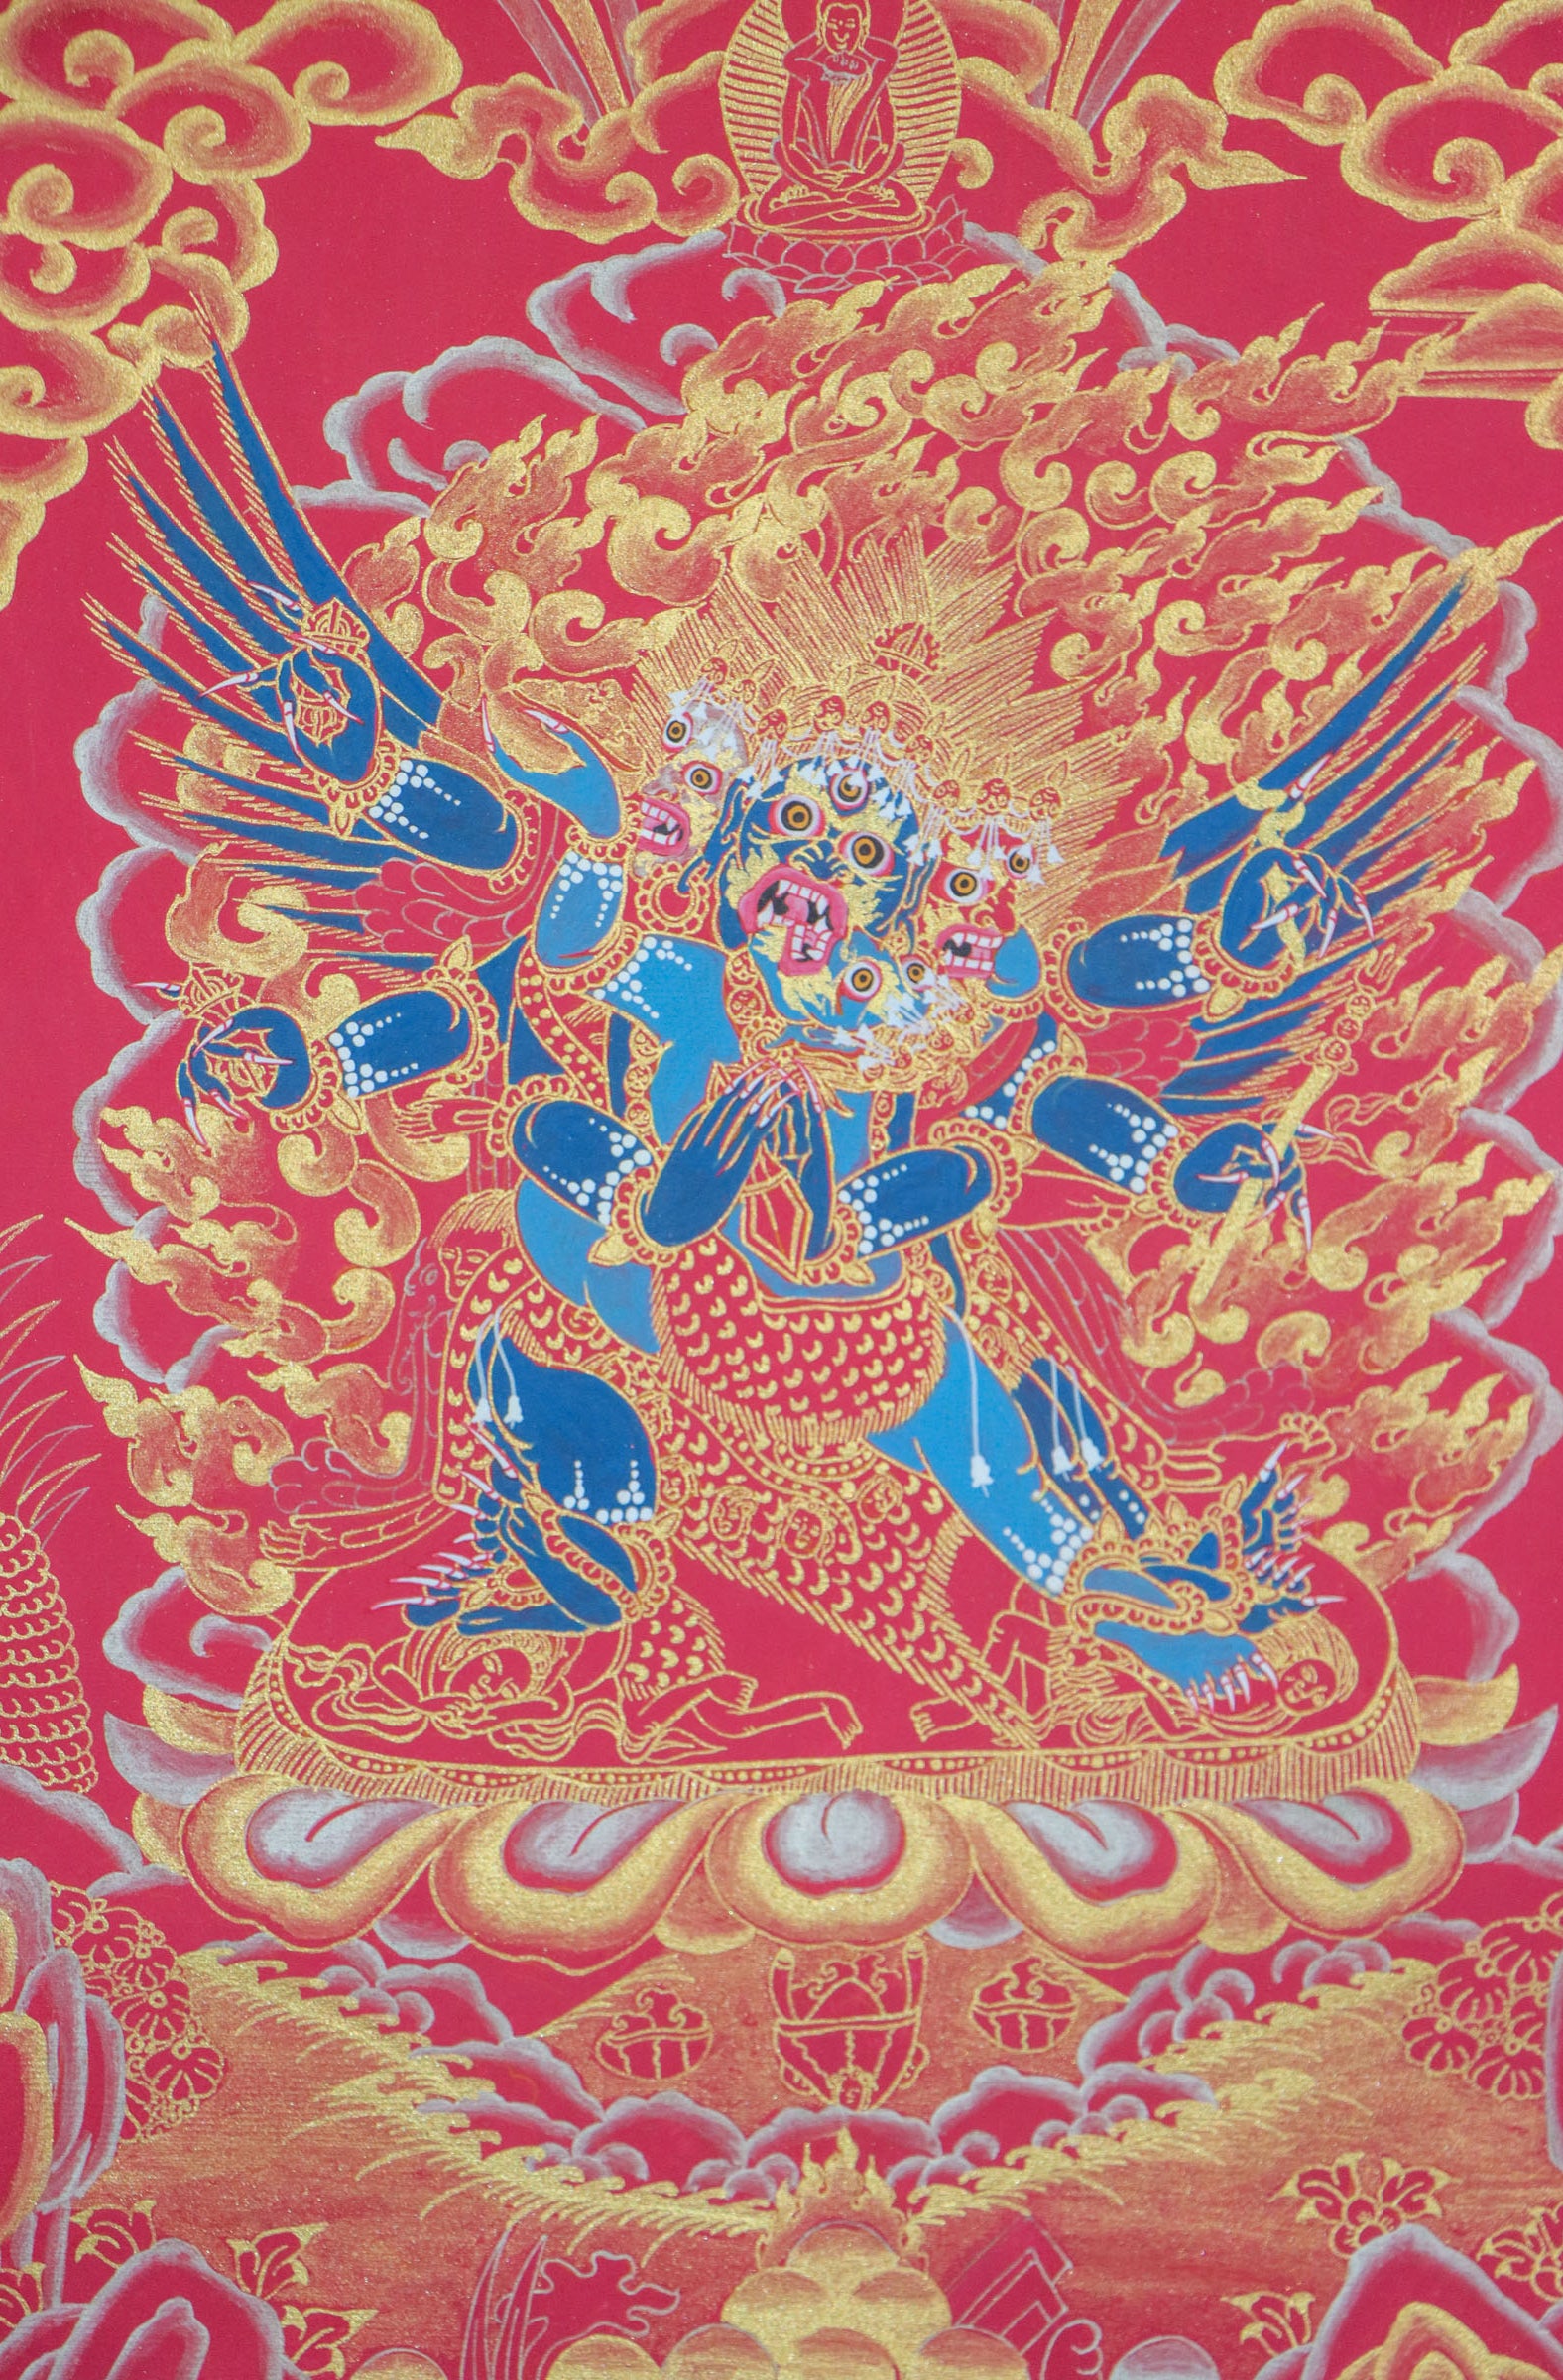 Vajrakilaya thangka symbolizes protection from obstacles, negative energies, and spiritual interference.